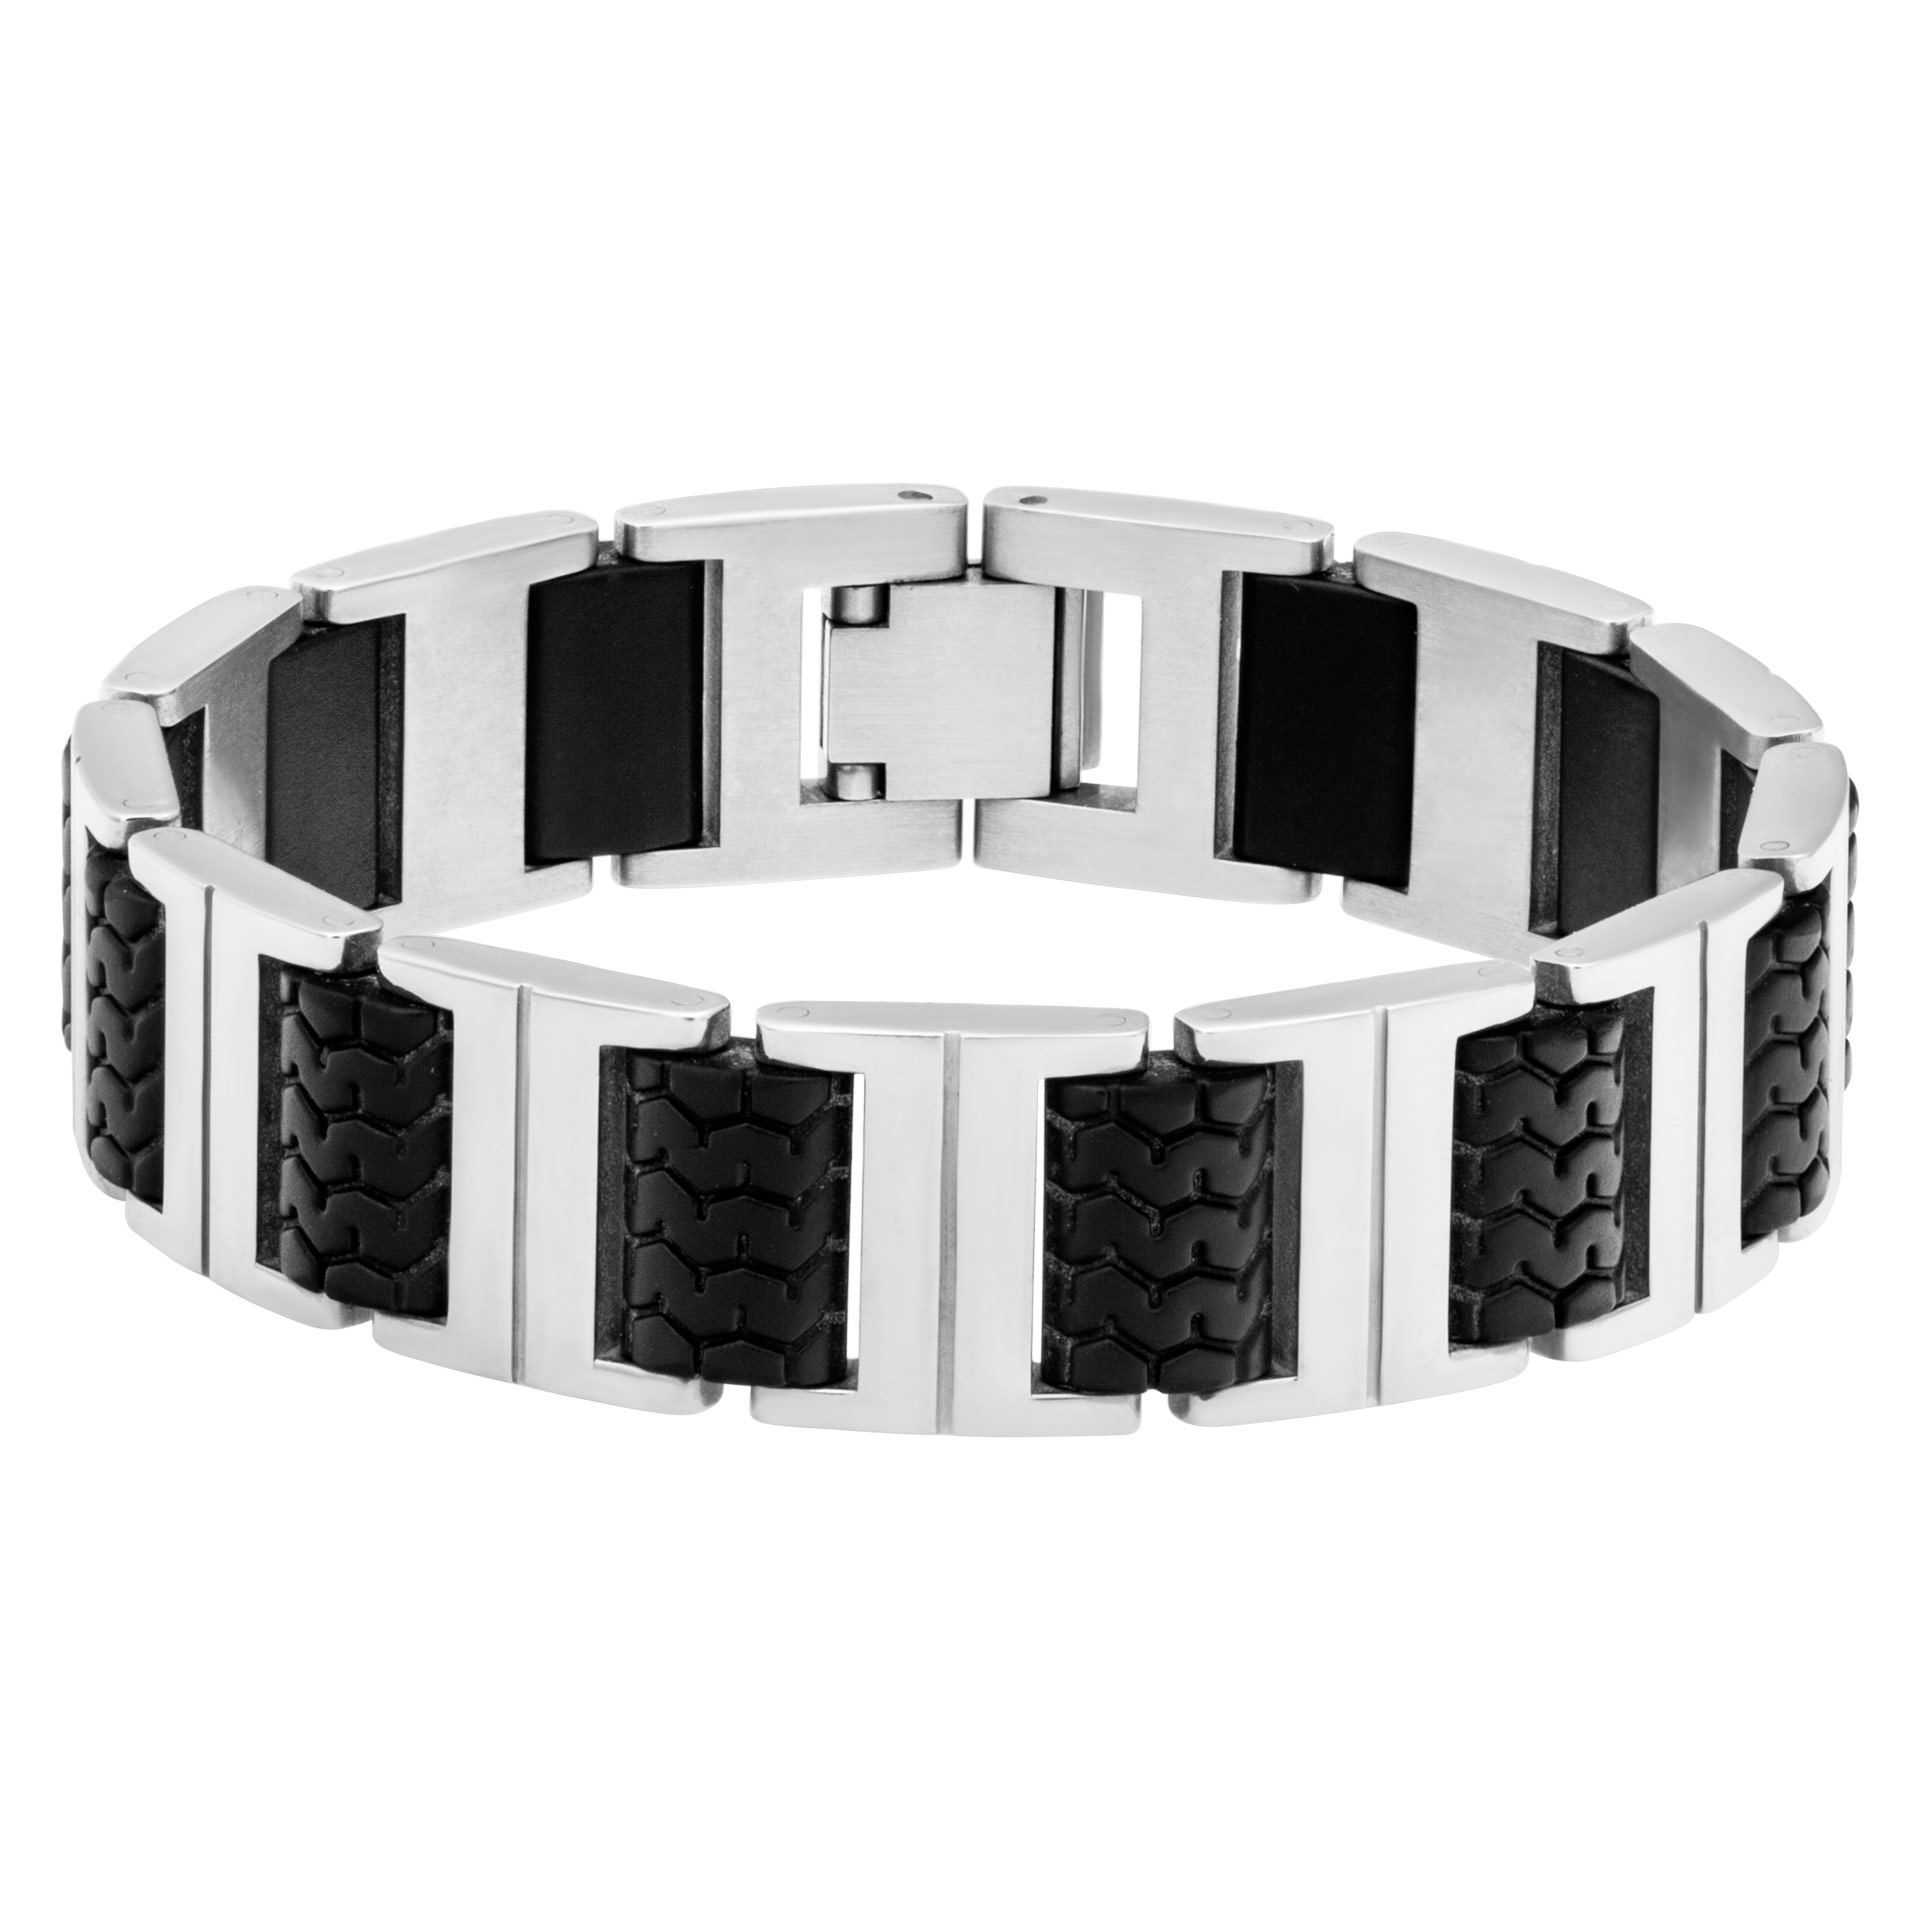 Chopard racing bracelet in stainless steel and black rubber